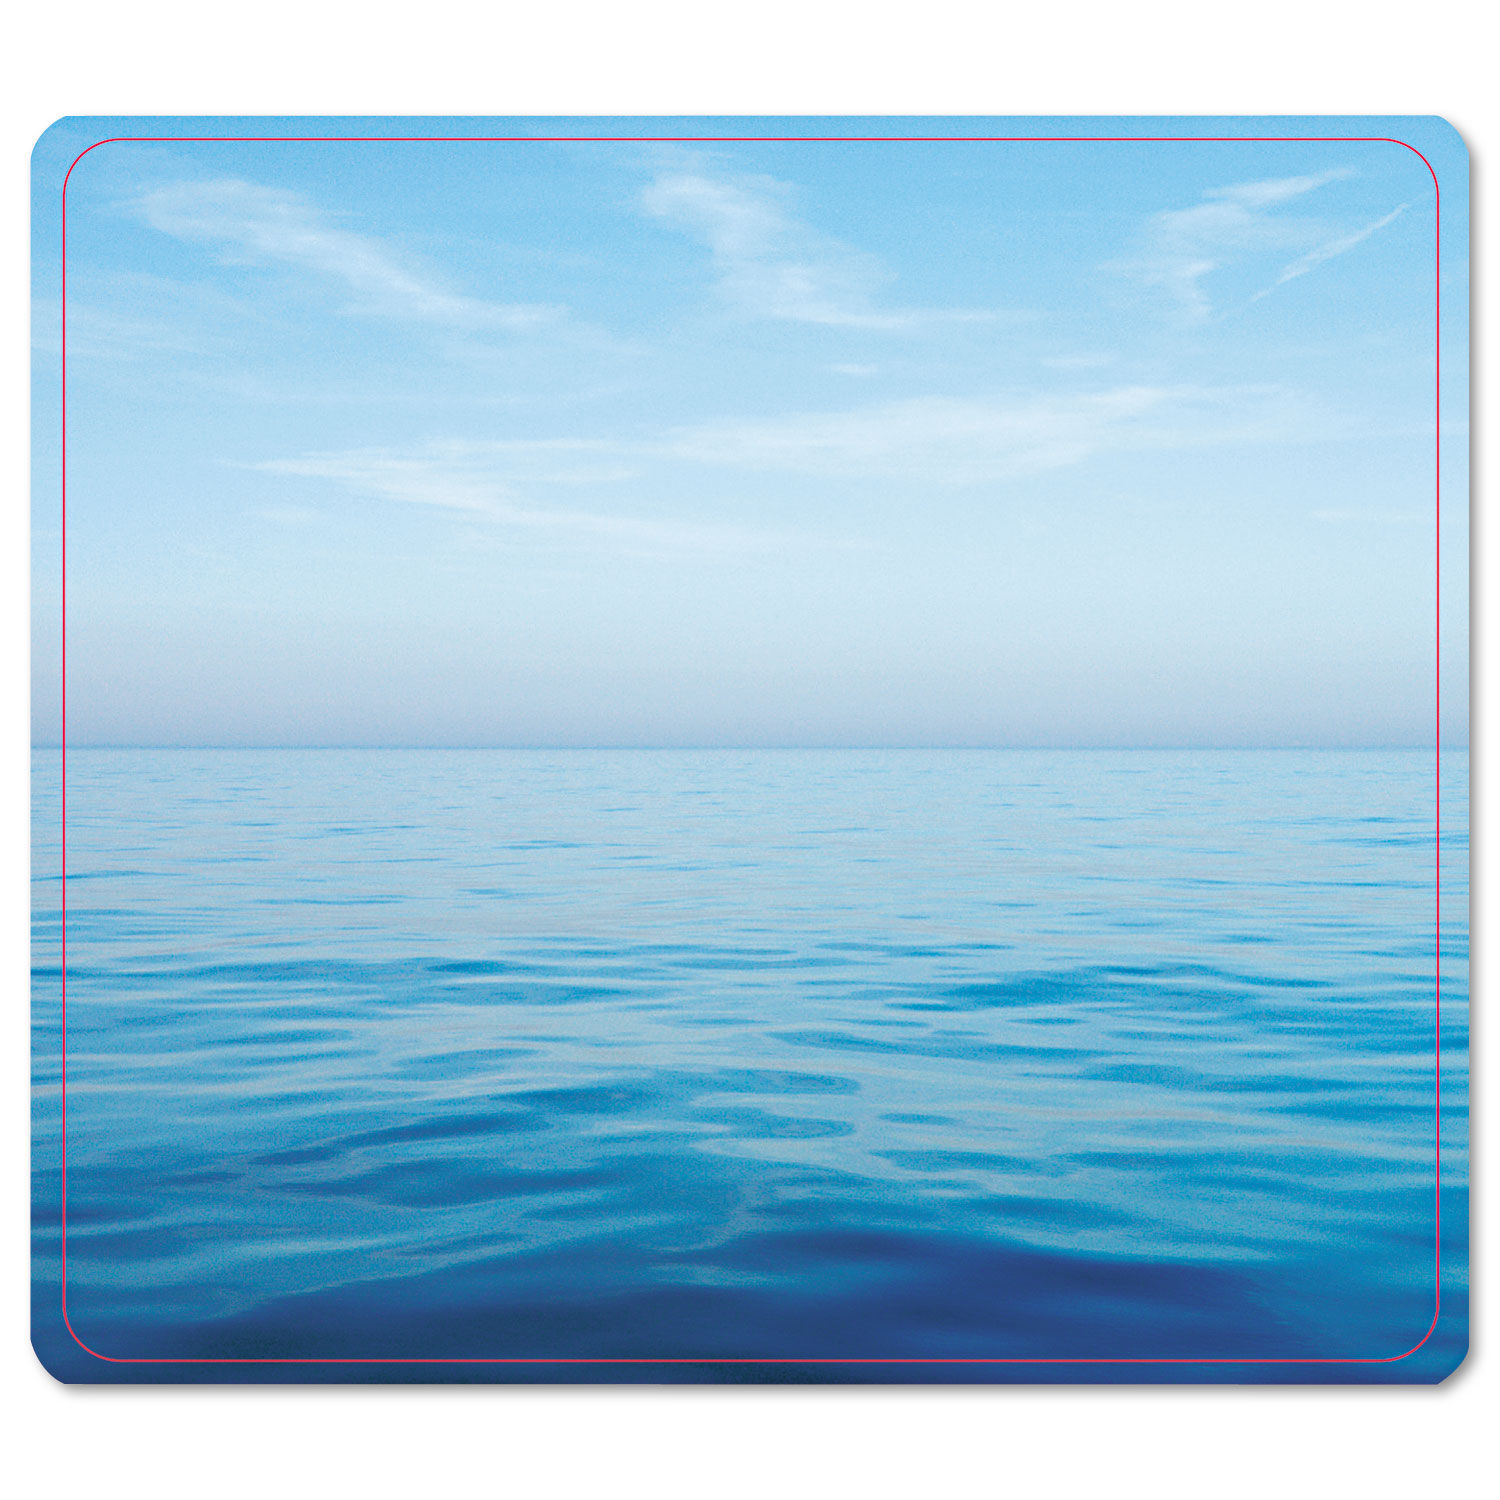 Recycled Mouse Pad 9 x 8, Blue Ocean Design